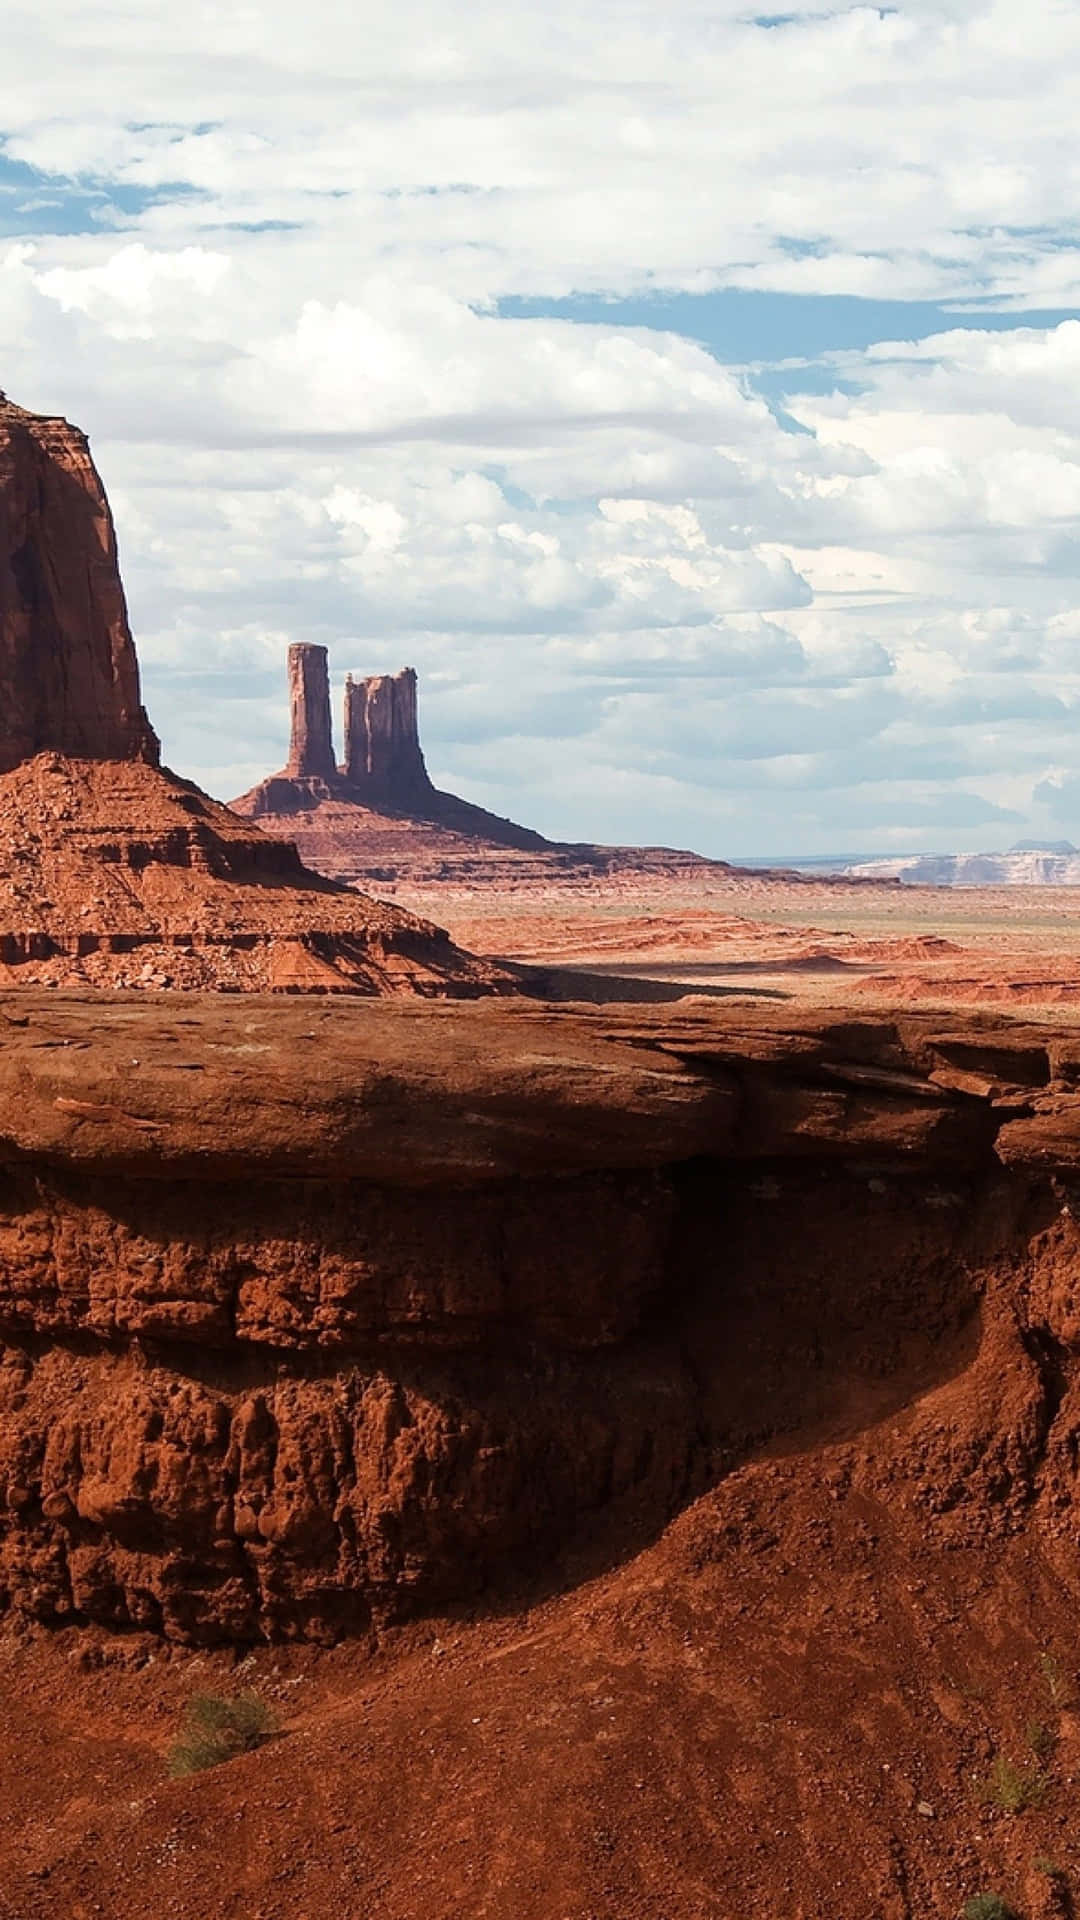 Monumentvalley, Arizona Would Be Translated As 